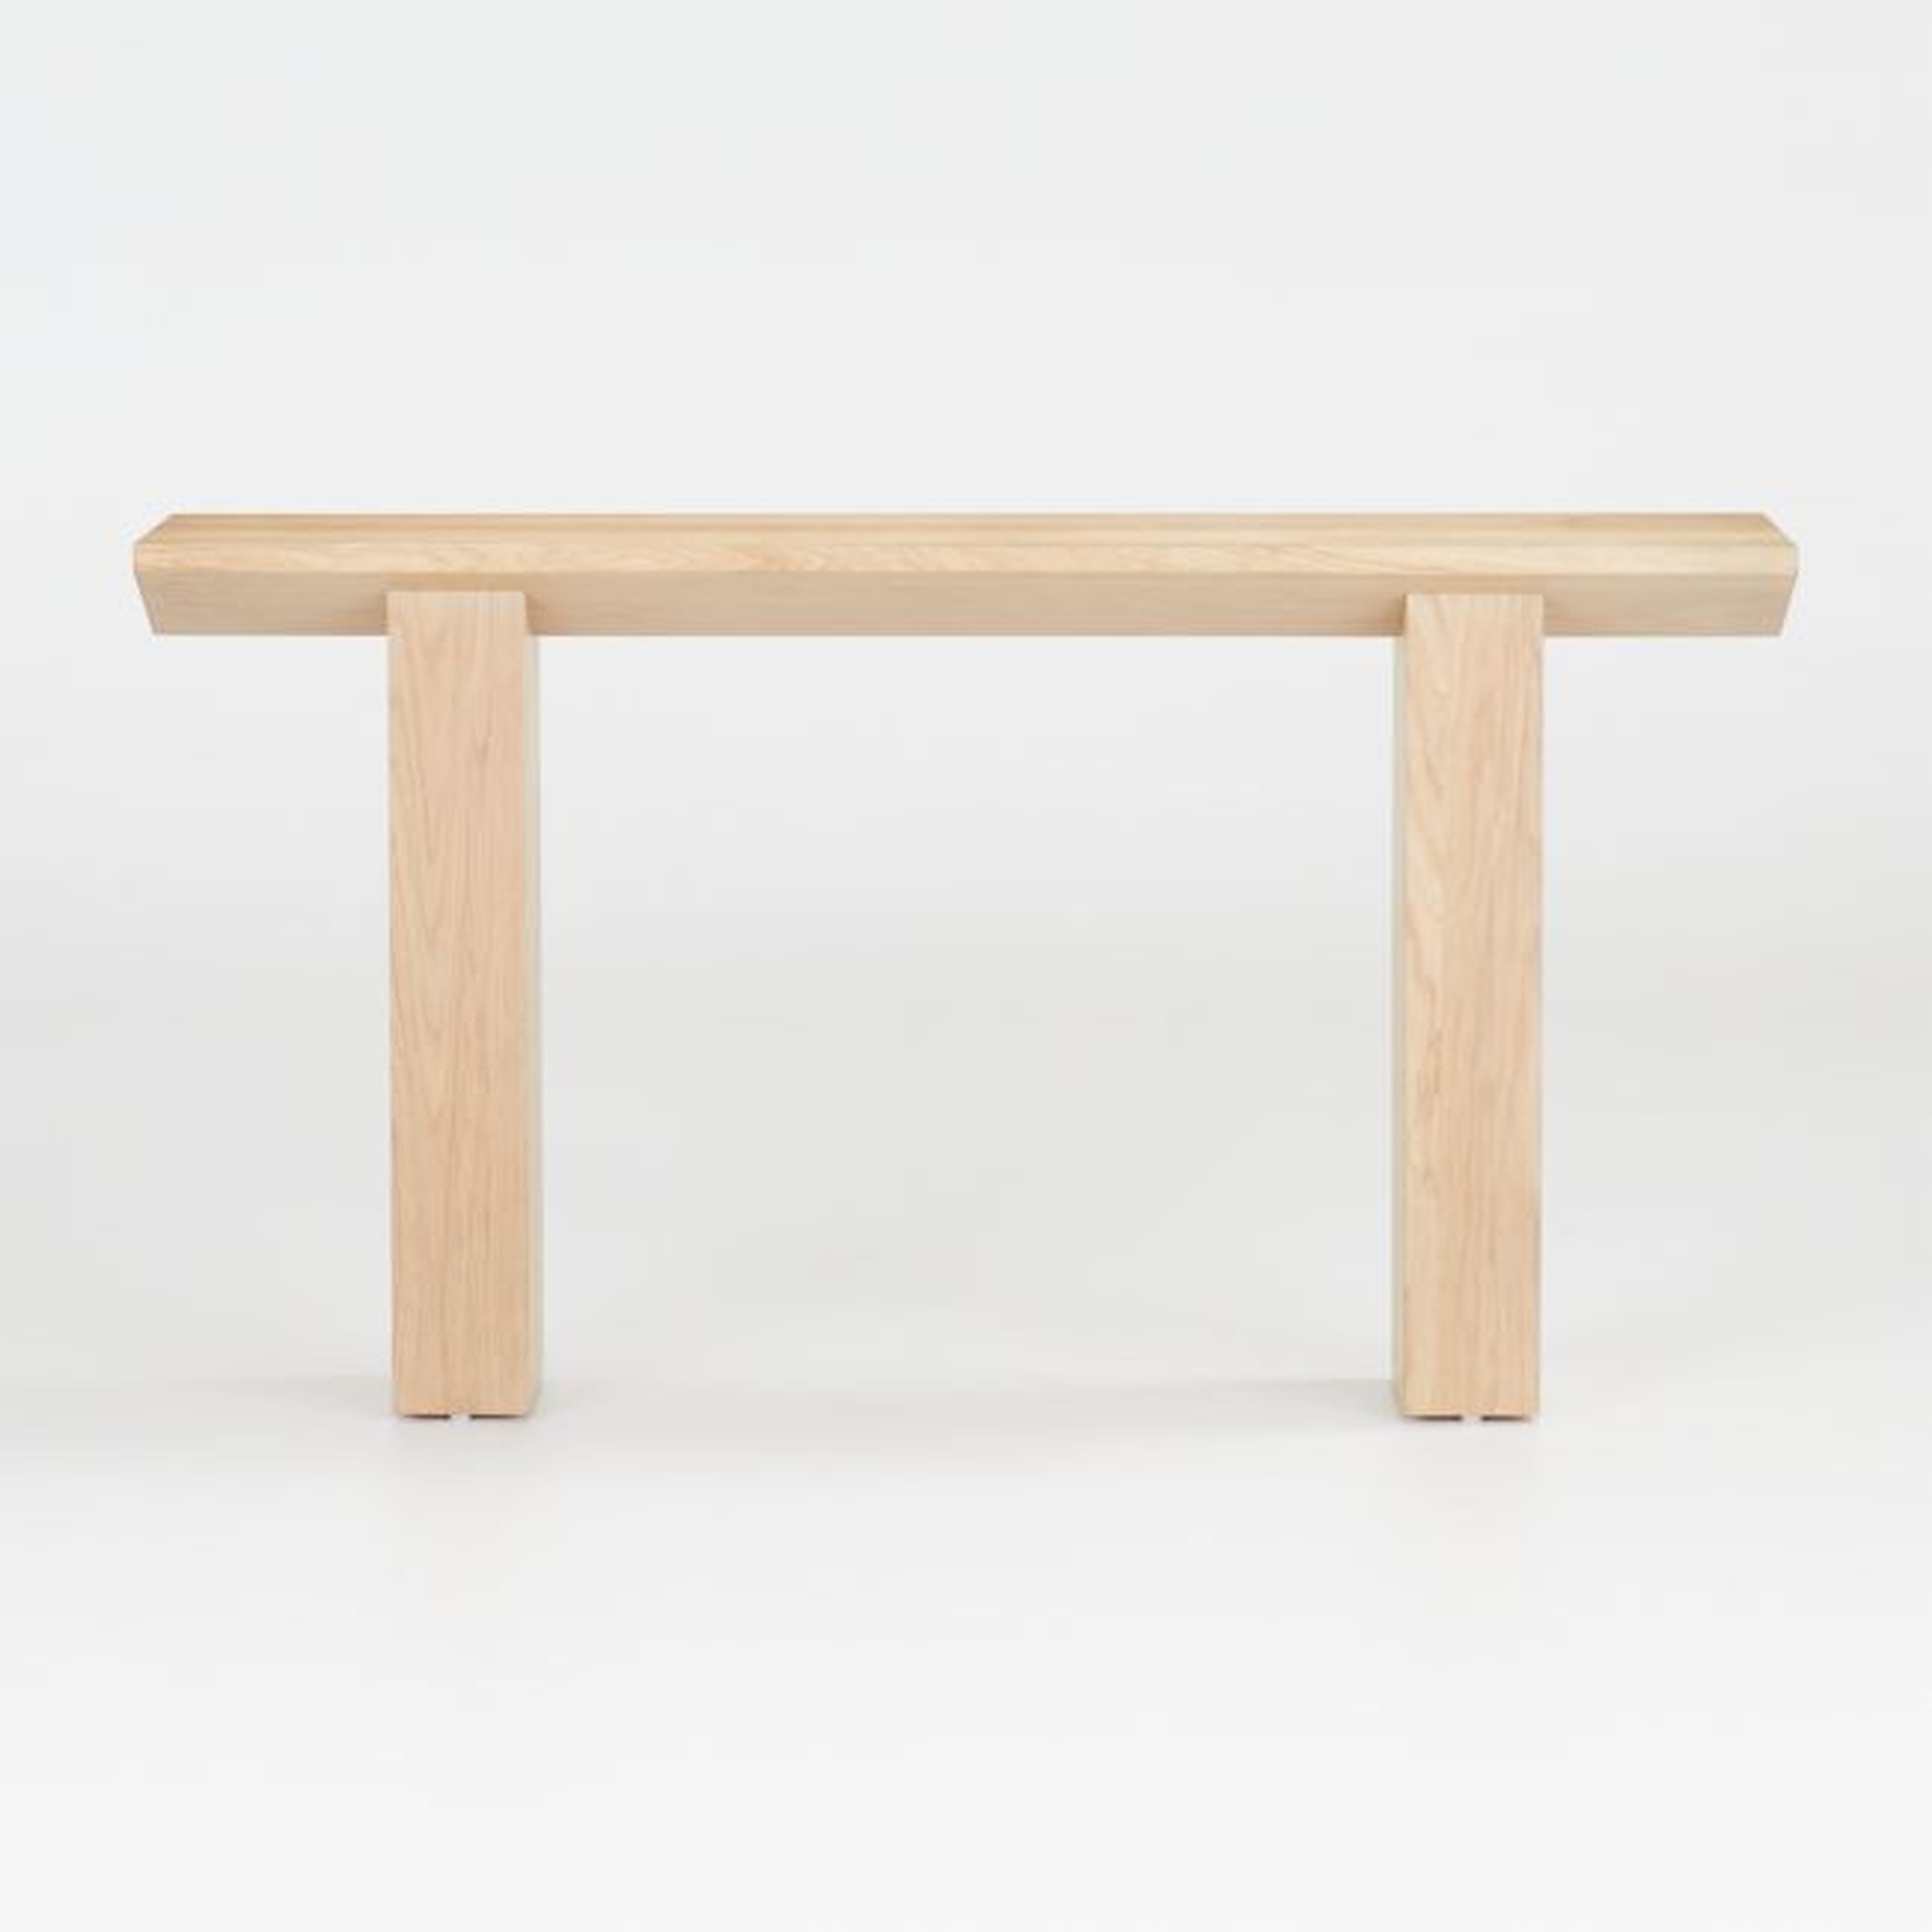 Van Natural Wood Console Table by Leanne Ford - Crate and Barrel